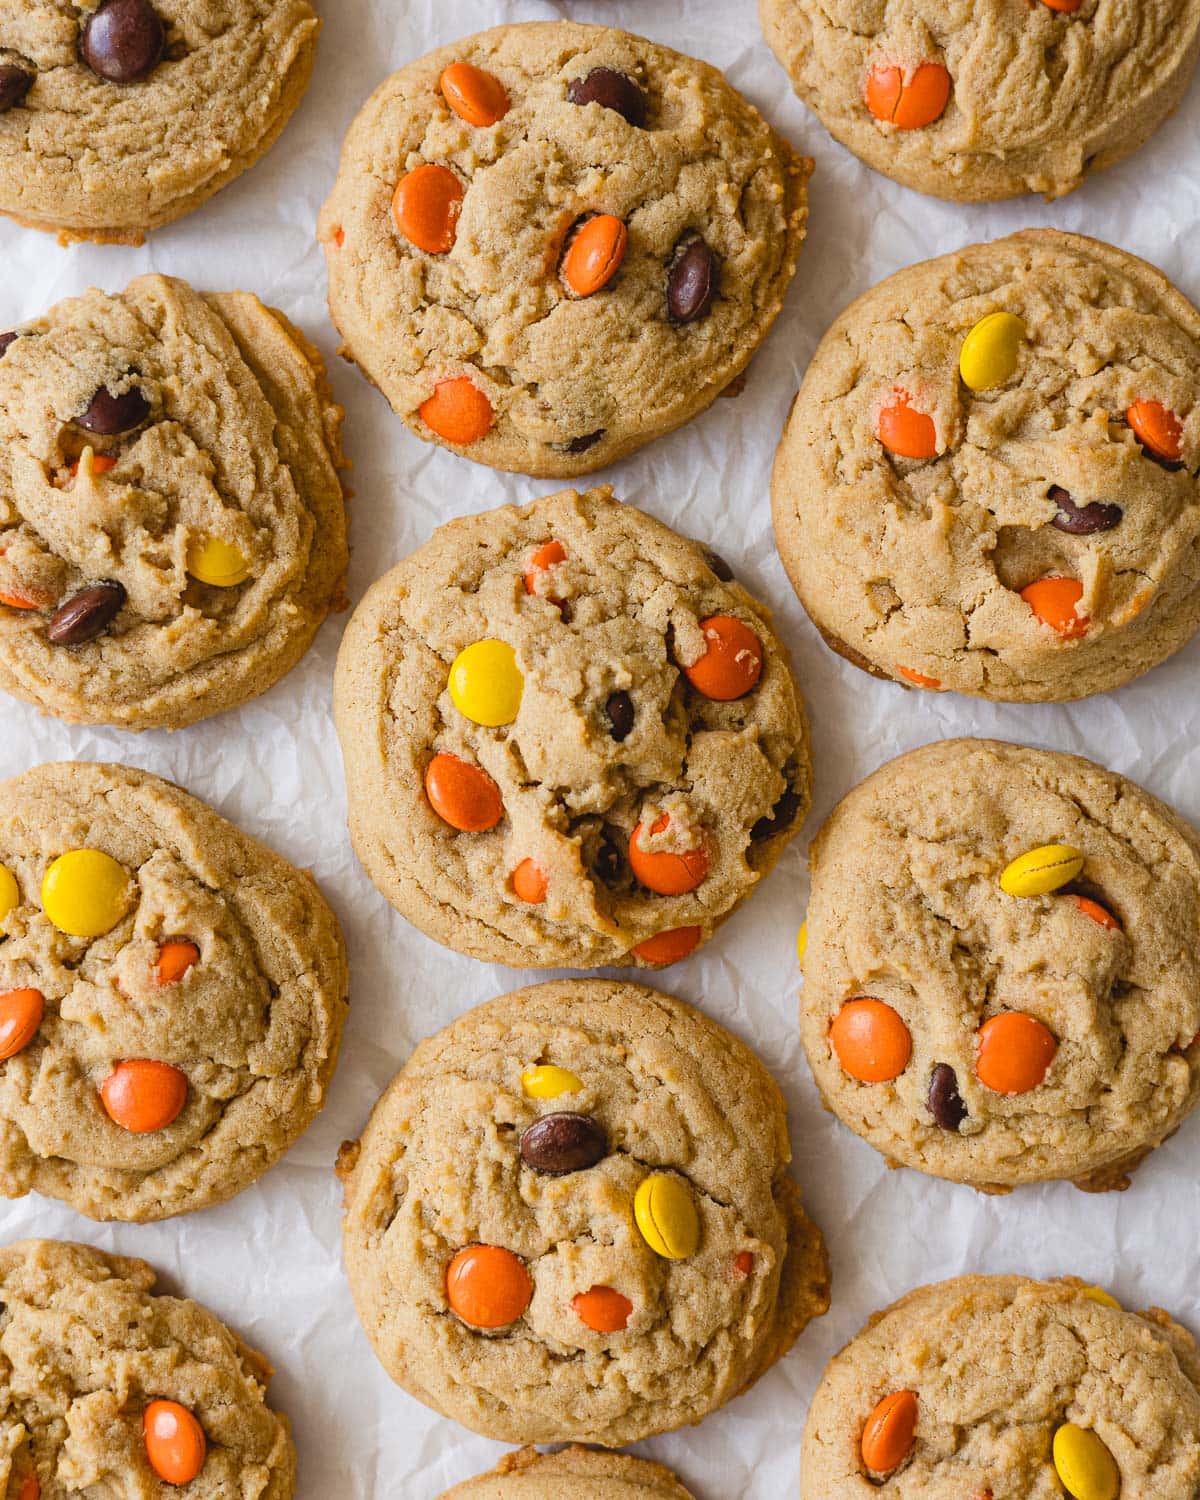 Rows of Reese's Pieces Peanut Butter Cookies.